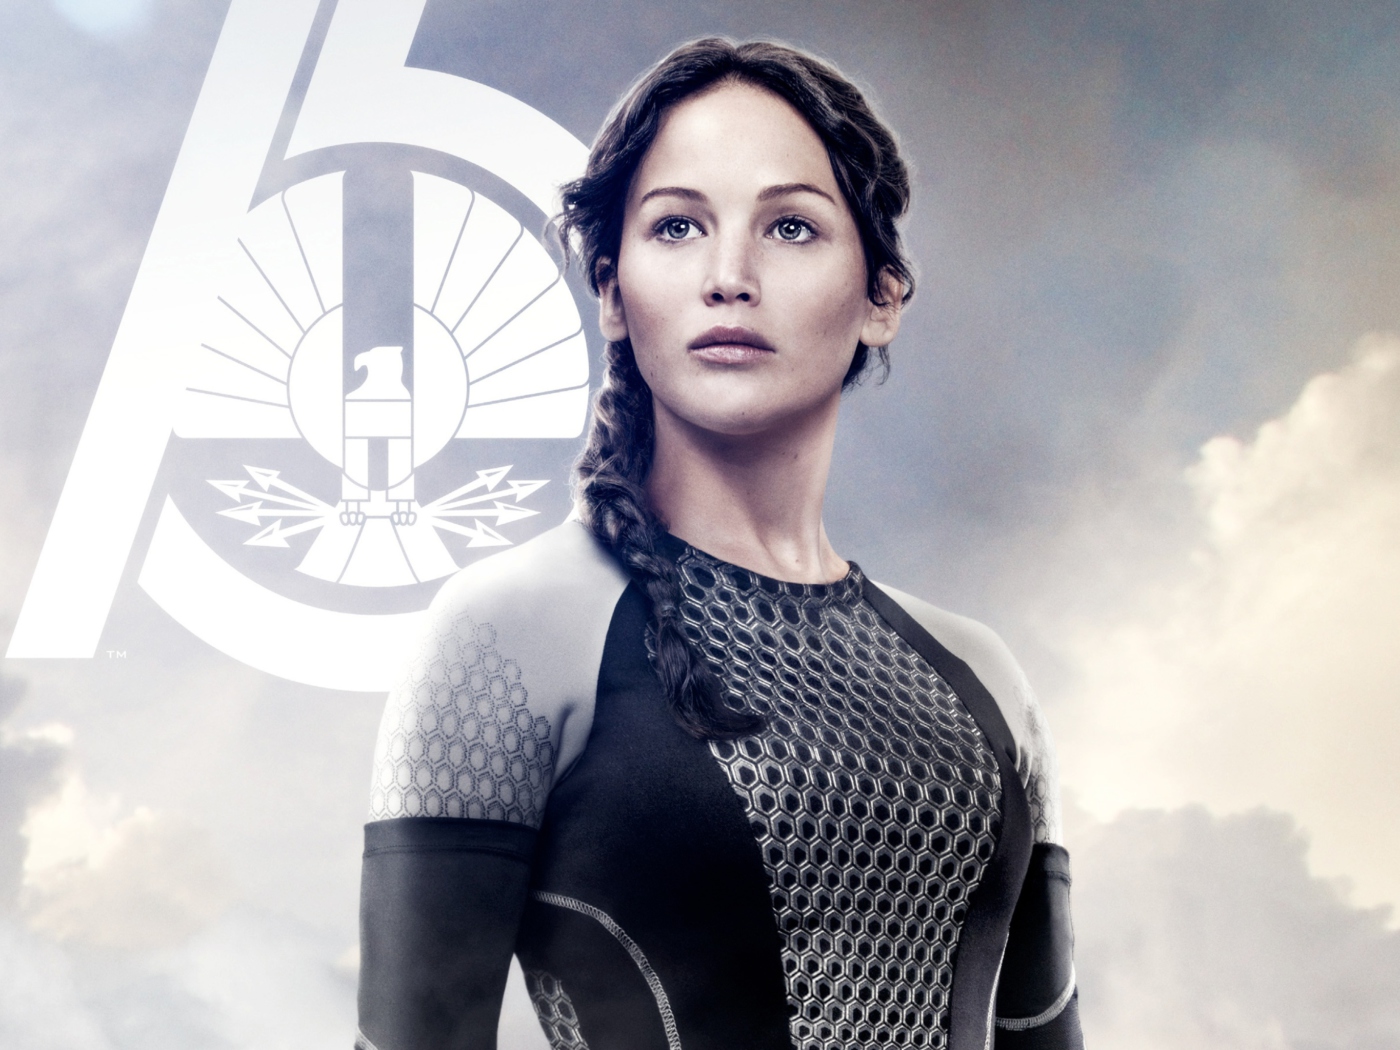 Jennifer Lawrence In The Hunger Games Catching Fire screenshot #1 1400x1050